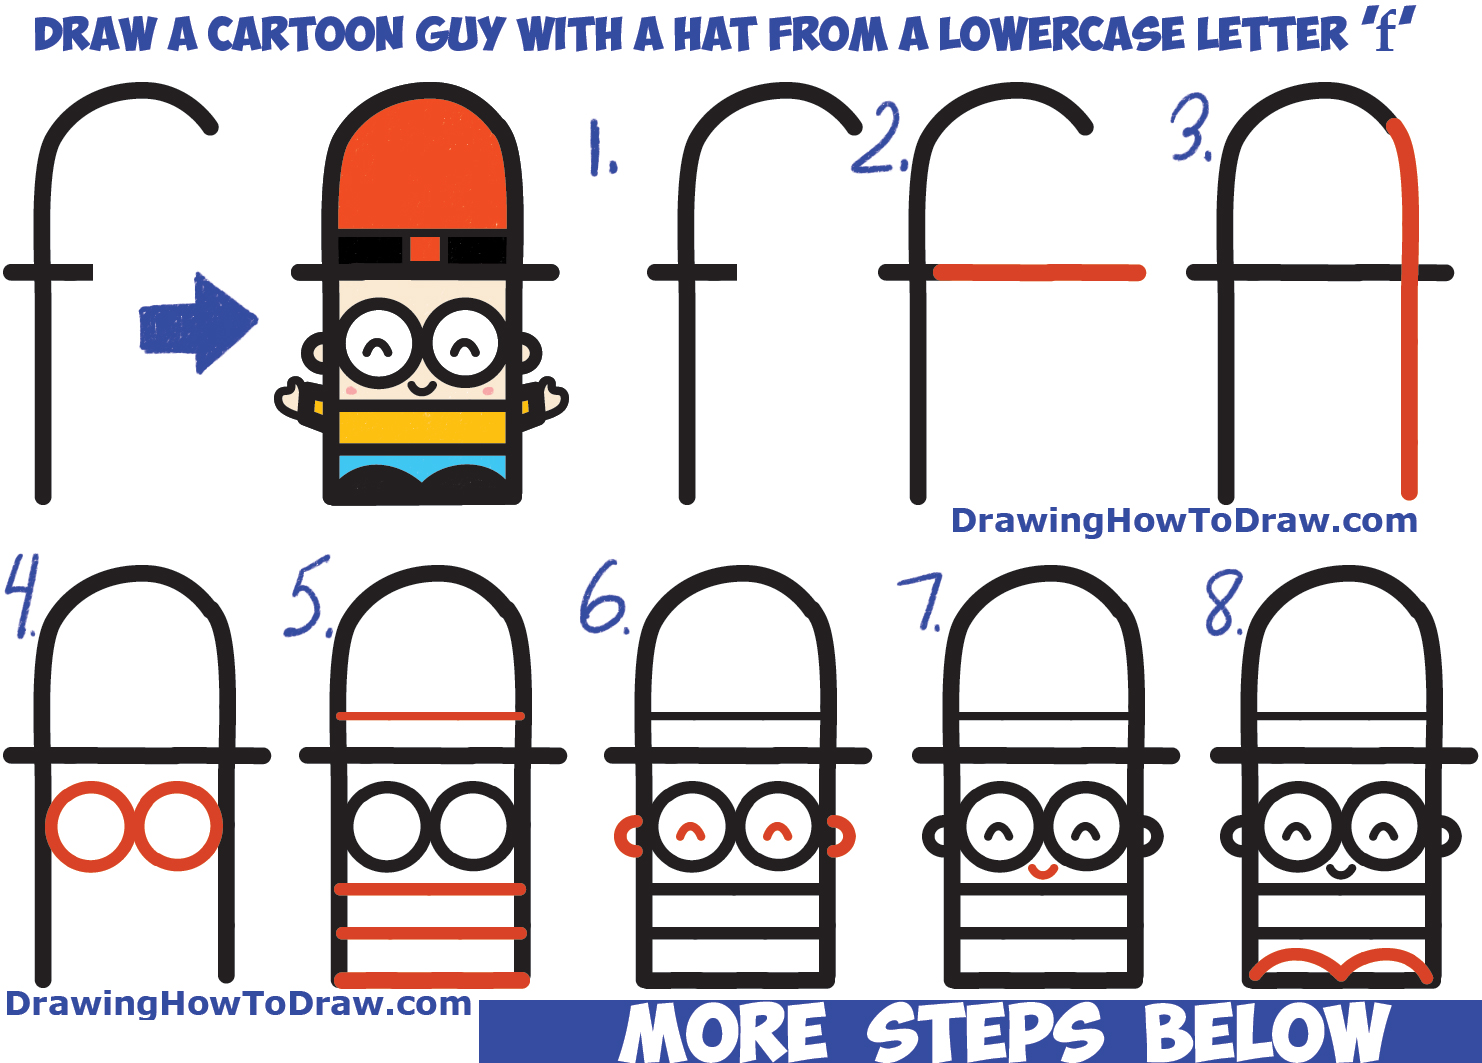 How to Draw Cartoon Guy with Hat from Lowercase Letter 'f' Easy Step by Step Drawing Tutorial for Kids